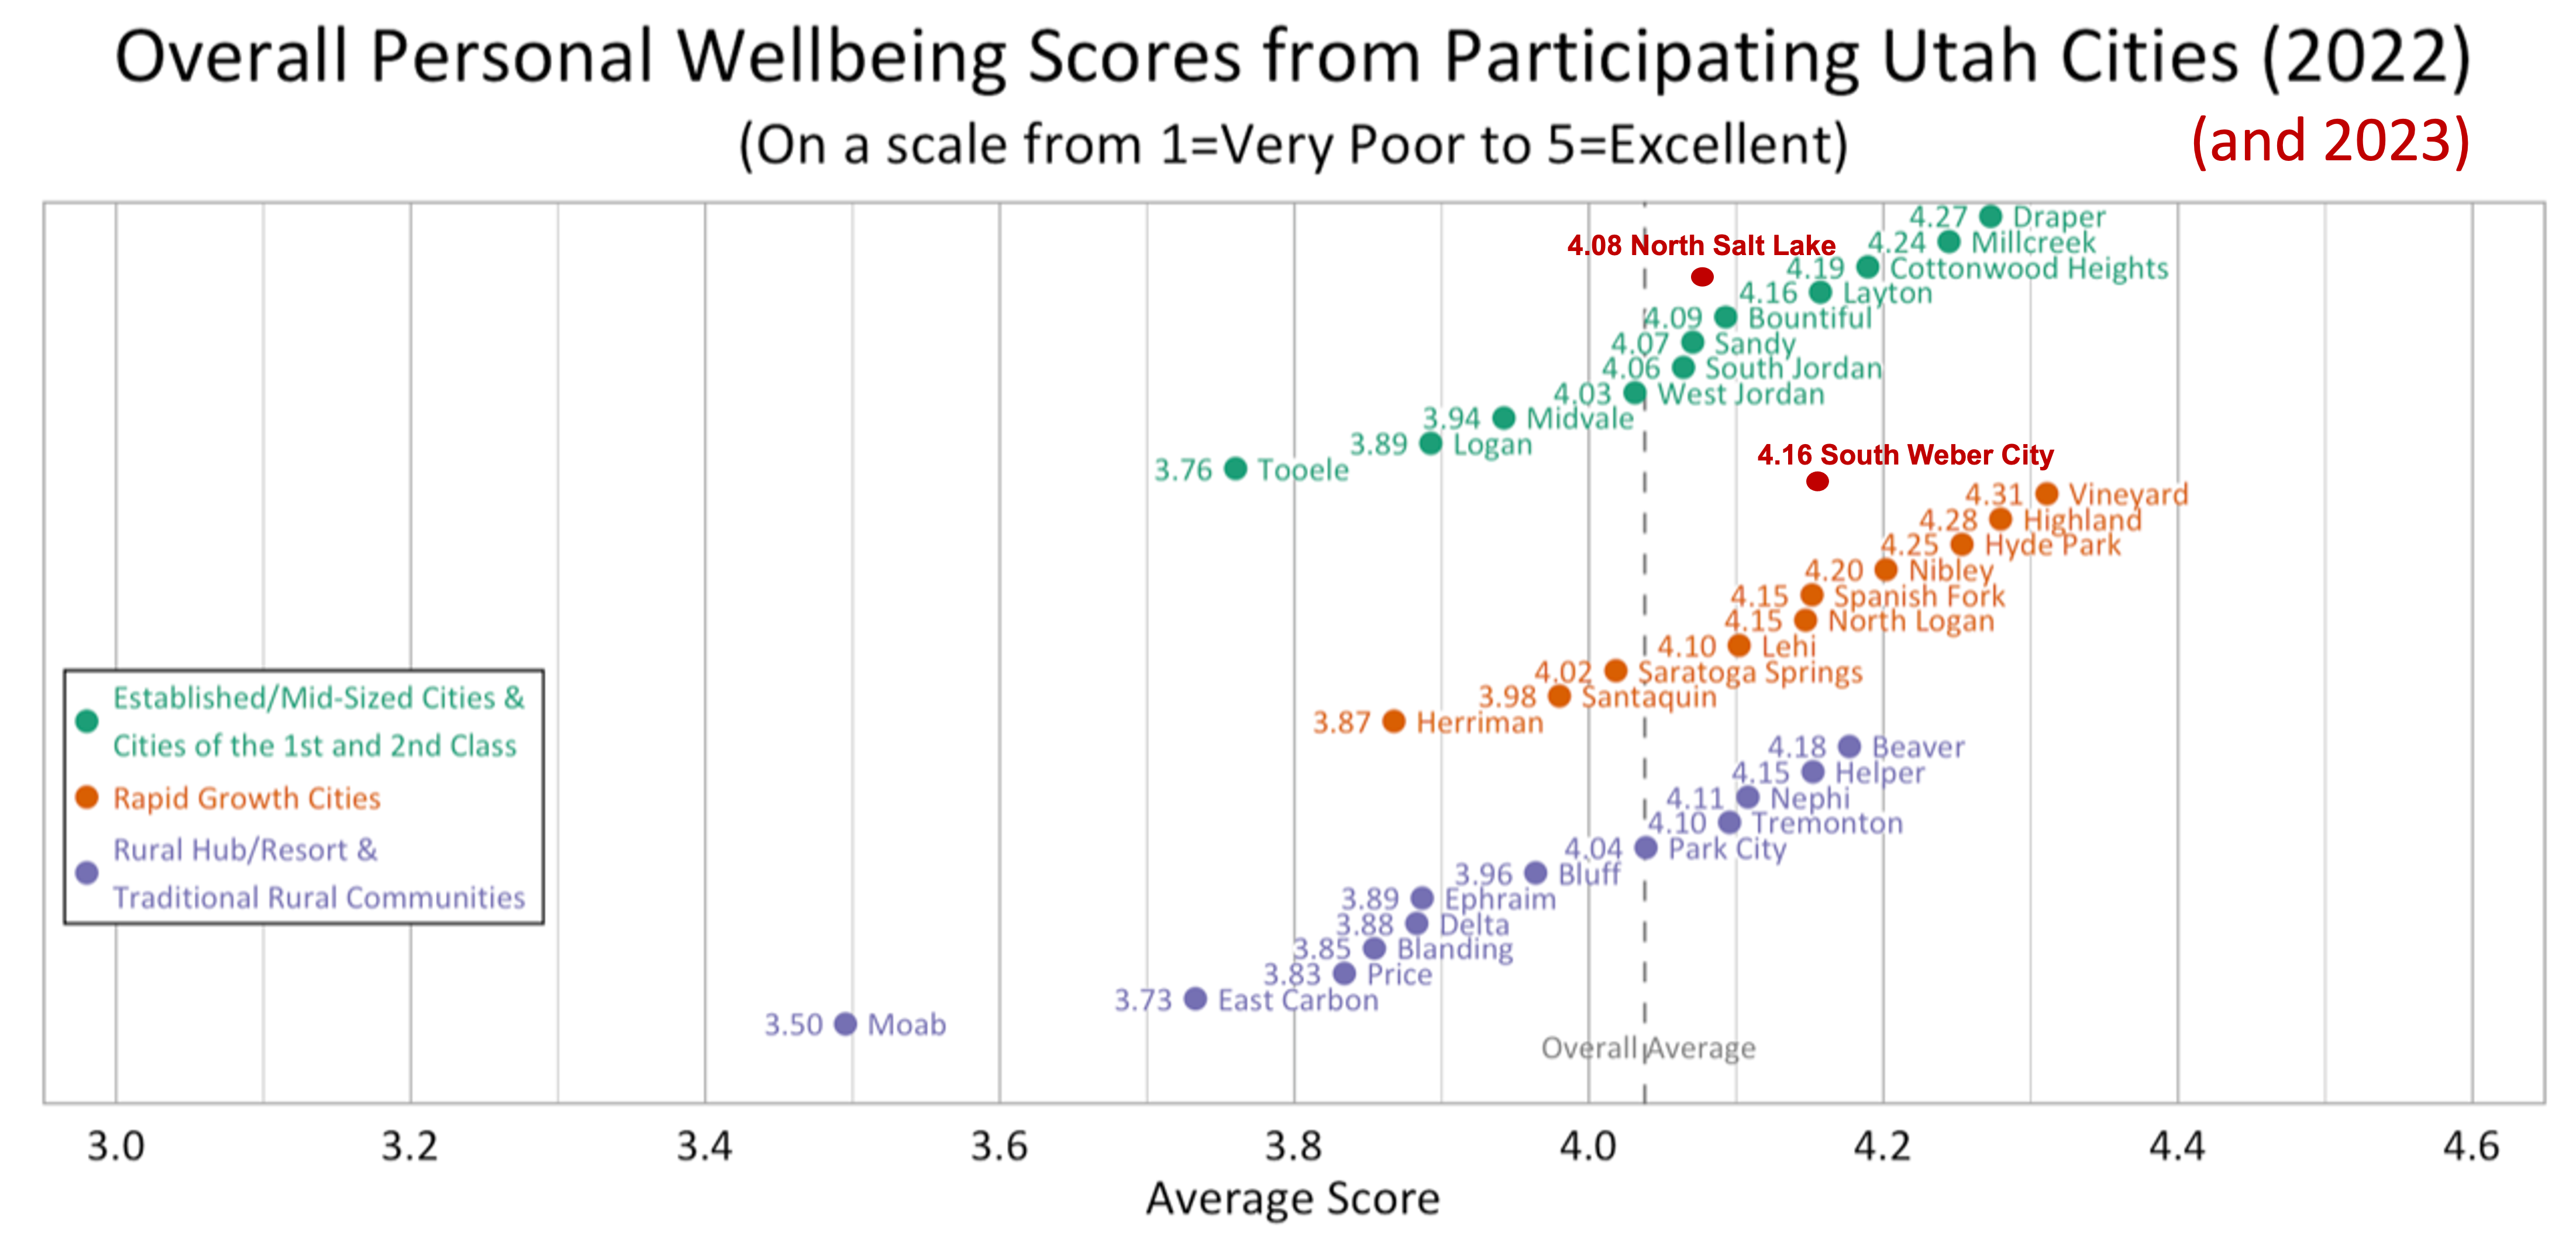 Dot Plot. Title: Overall Personal Wellbeing Scores from Participating Utah Cities (2022). Subtitle: (On a scale from 1=Very Poor to 5=Excellent). Group: Established/Mid-Sized Cities. Draper: Average Score 4.27; Millcreek: Average Score 4.24; Cottonwood Heights: Average Score 4.19; Layton: Average Score 4.16; Bountiful: Average Score 4.09; Sandy: Average Score 4.07; South Jordan: Average Score 4.06; West Jordan: Average Score 4.03; Midvale: Average Score 3.94; Logan: Average Score 3.89; Tooele: Average Score 3.76. Group: Rapid Growth Cities. Vineyard: Average Score 4.31; Highland: Average Score 4.28; Hyde Park: Average Score 4.25; Nibley: Average Score 4.20; South Weber City: Average Score 4.16; Spanish Fork: Average Score 4.15; North Logan: Average Score 4.15; Lehi: Average Score 4.10; Saratoga Springs: Average Score 4.02; Santaquin: Average Score 3.98; Herriman: Average Score 3.87. Group: Rural, Rural Hub, & Resort and Traditional Communities. Beaver: Average Score 4.18; Helper: Average Score 4.15; Nephi: Average Score 4.11; Tremonton: Average Score 4.10; Park City: Average Score 4.04; Bluff: Average Score 3.96; Ephraim: Average Score 3.89; Delta: Average Score 3.88; Blanding: Average Score: 3.85; Price: Average Score 3.83; East Carbon: Average Score: 3.73; Moab: Average Score: 3.50. 